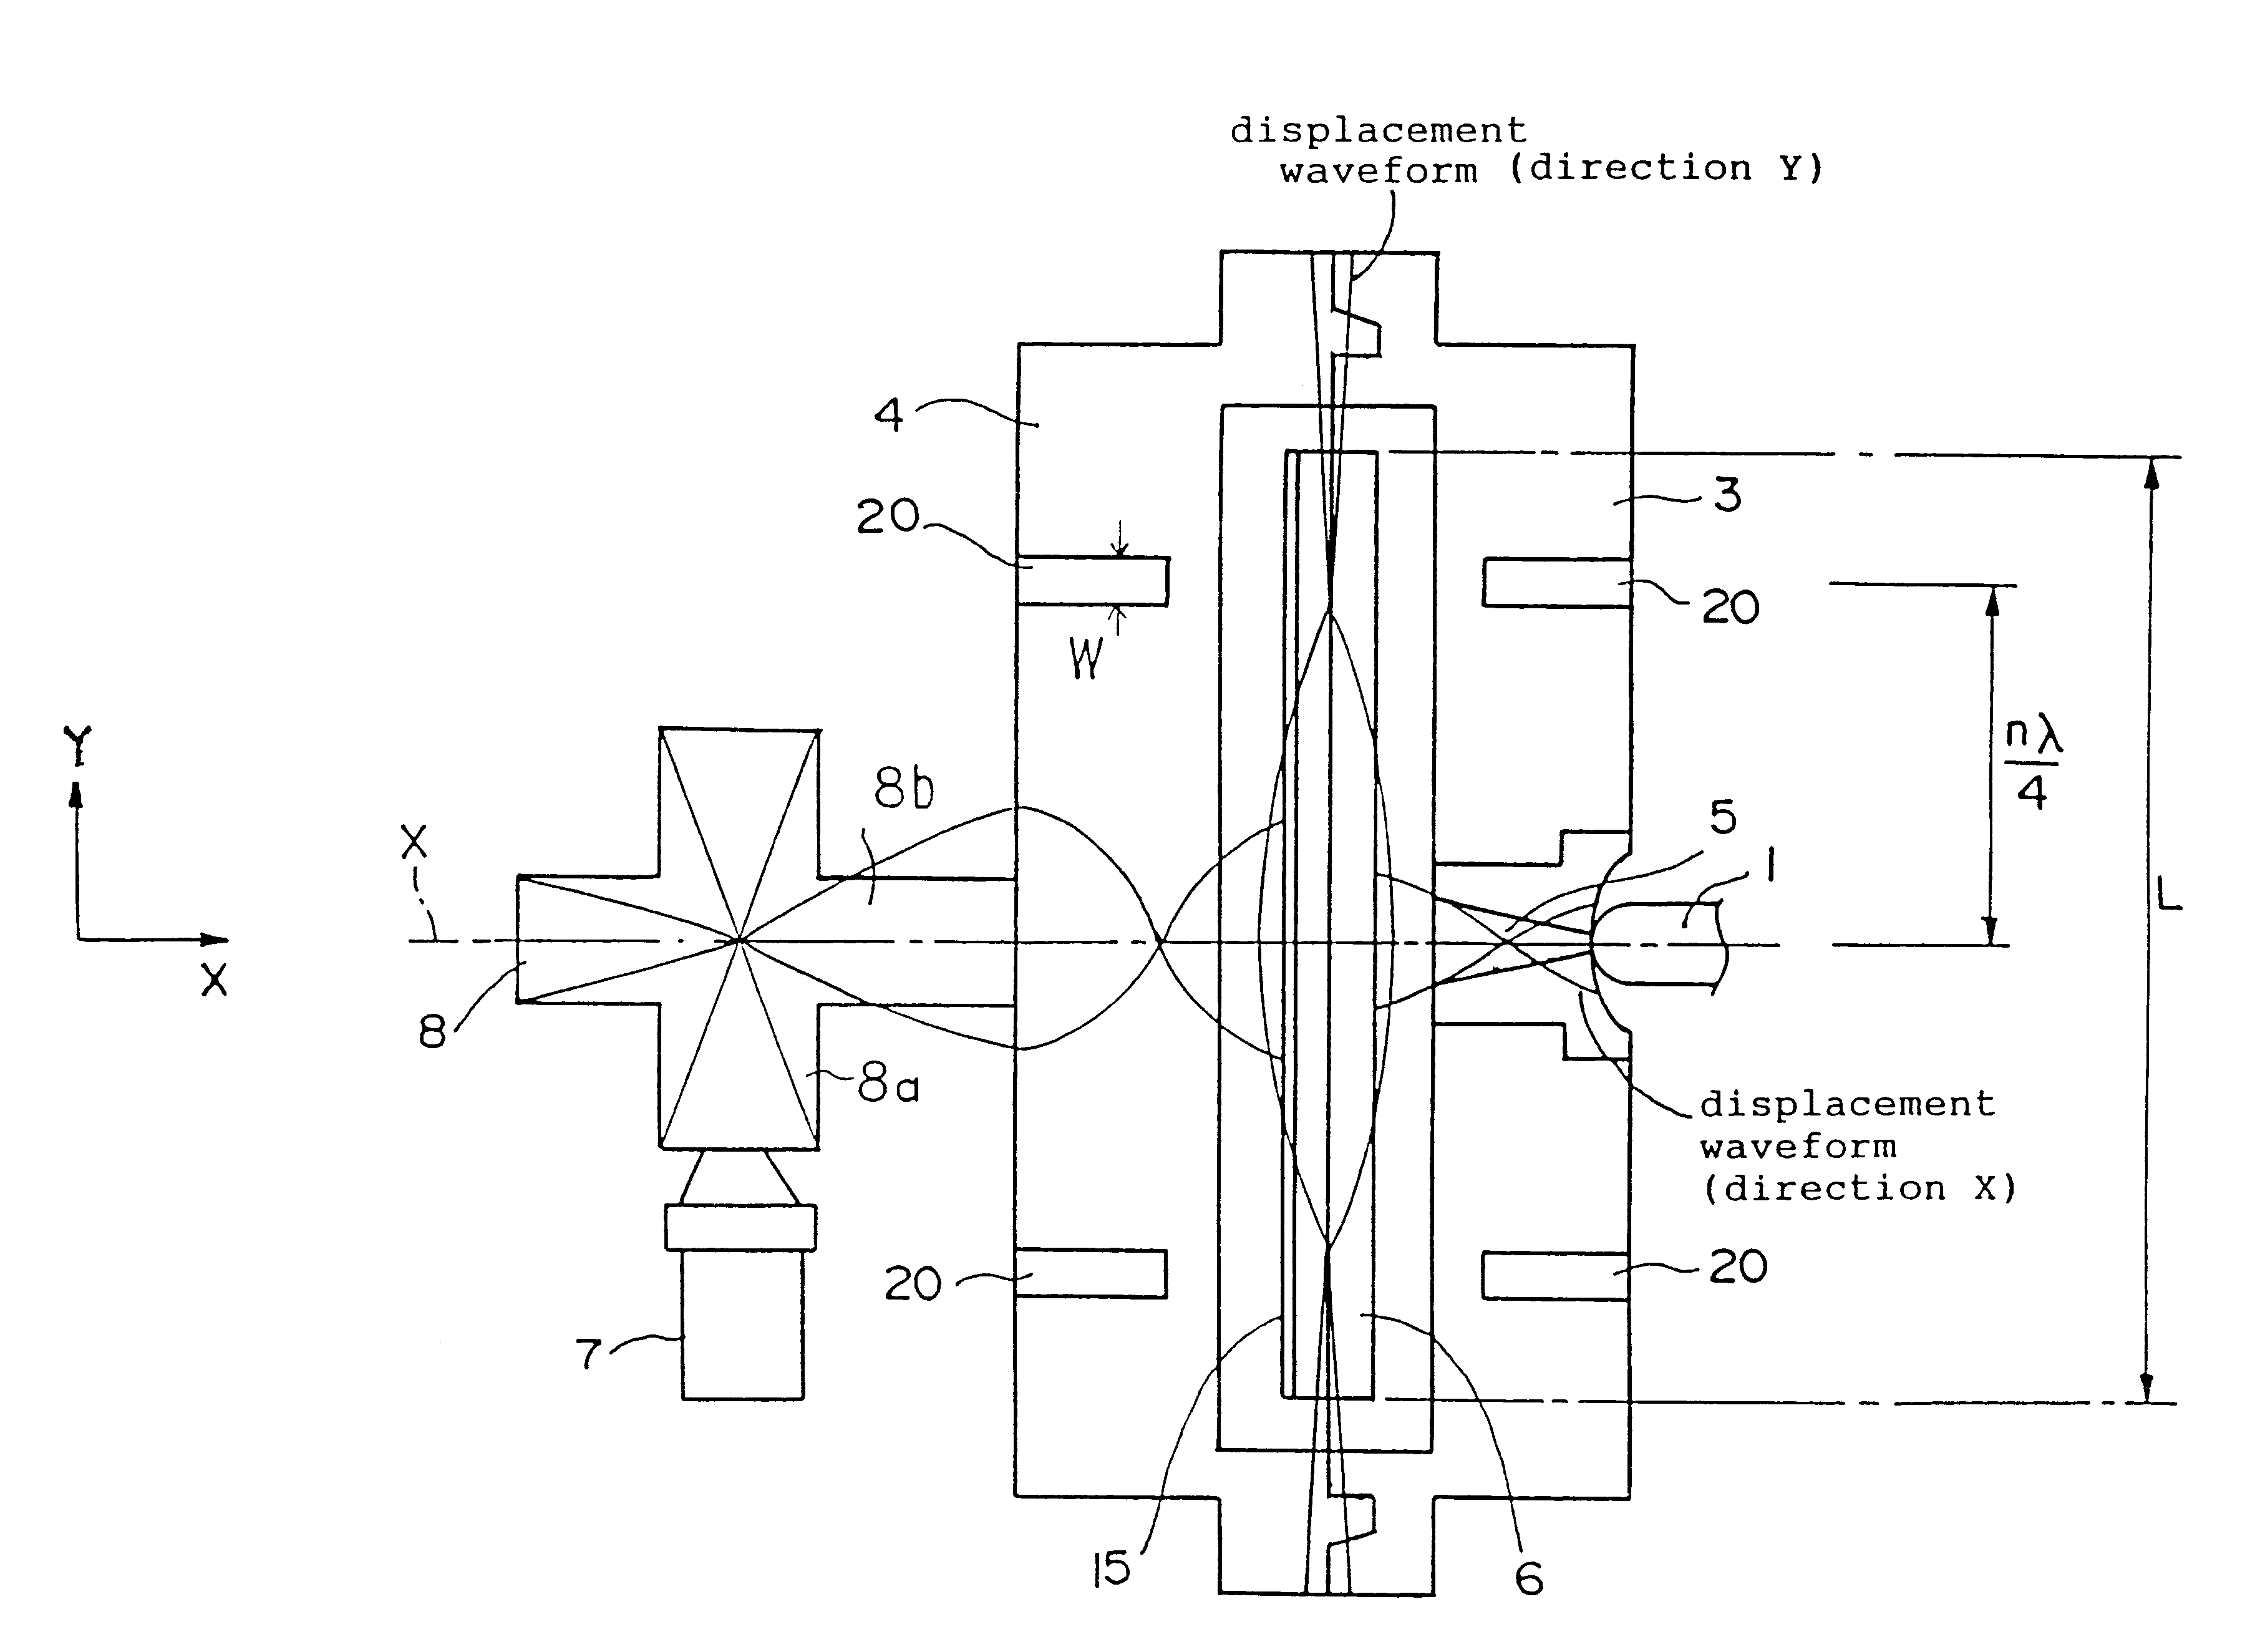 Ultrasonic injection mold for an optical disk